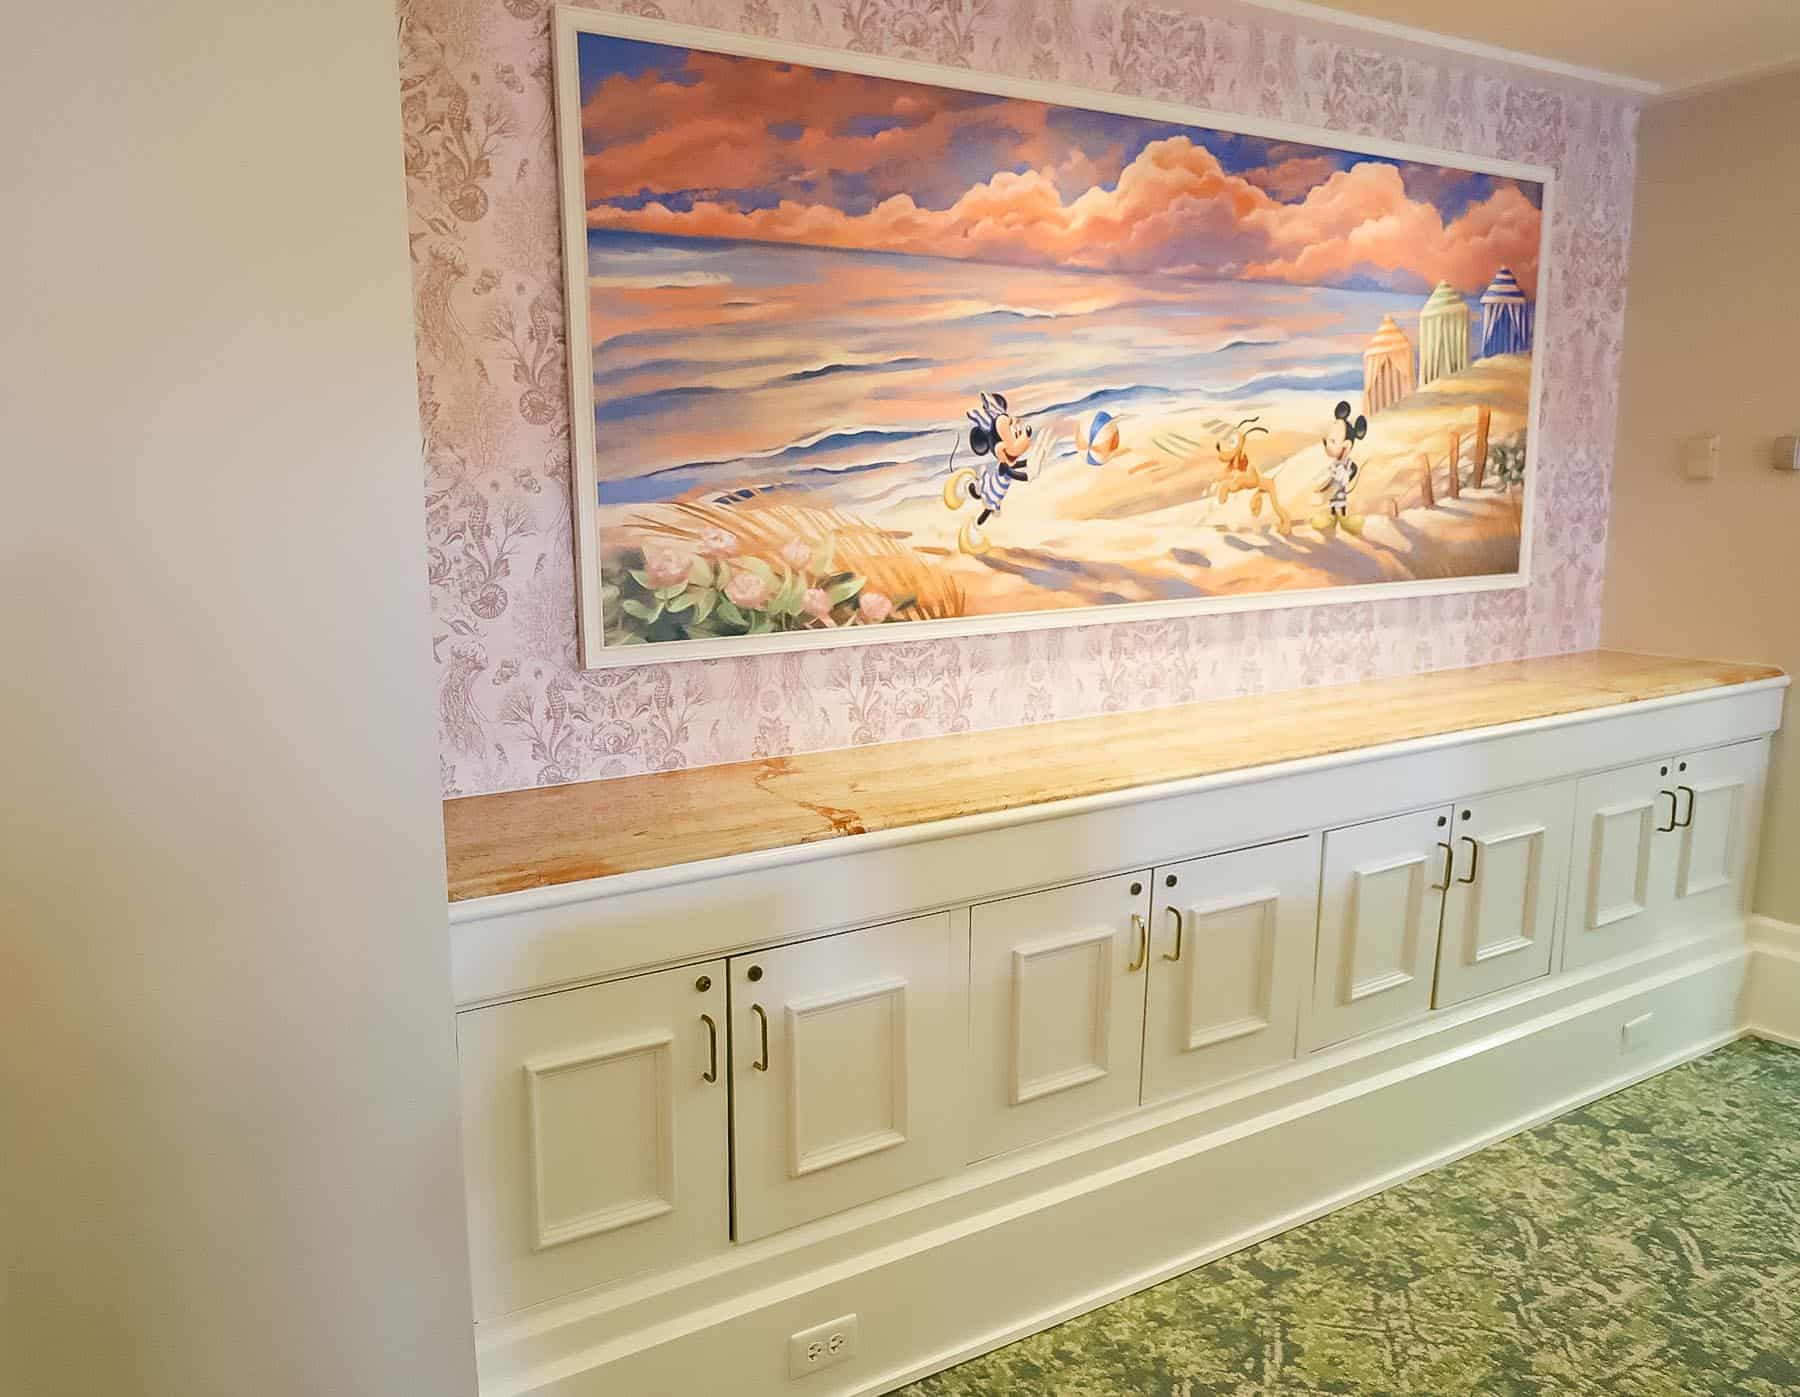 Mickey Mouse, Minnie Mouse, and Pluto featured in artwork at Disney's Beach Club 